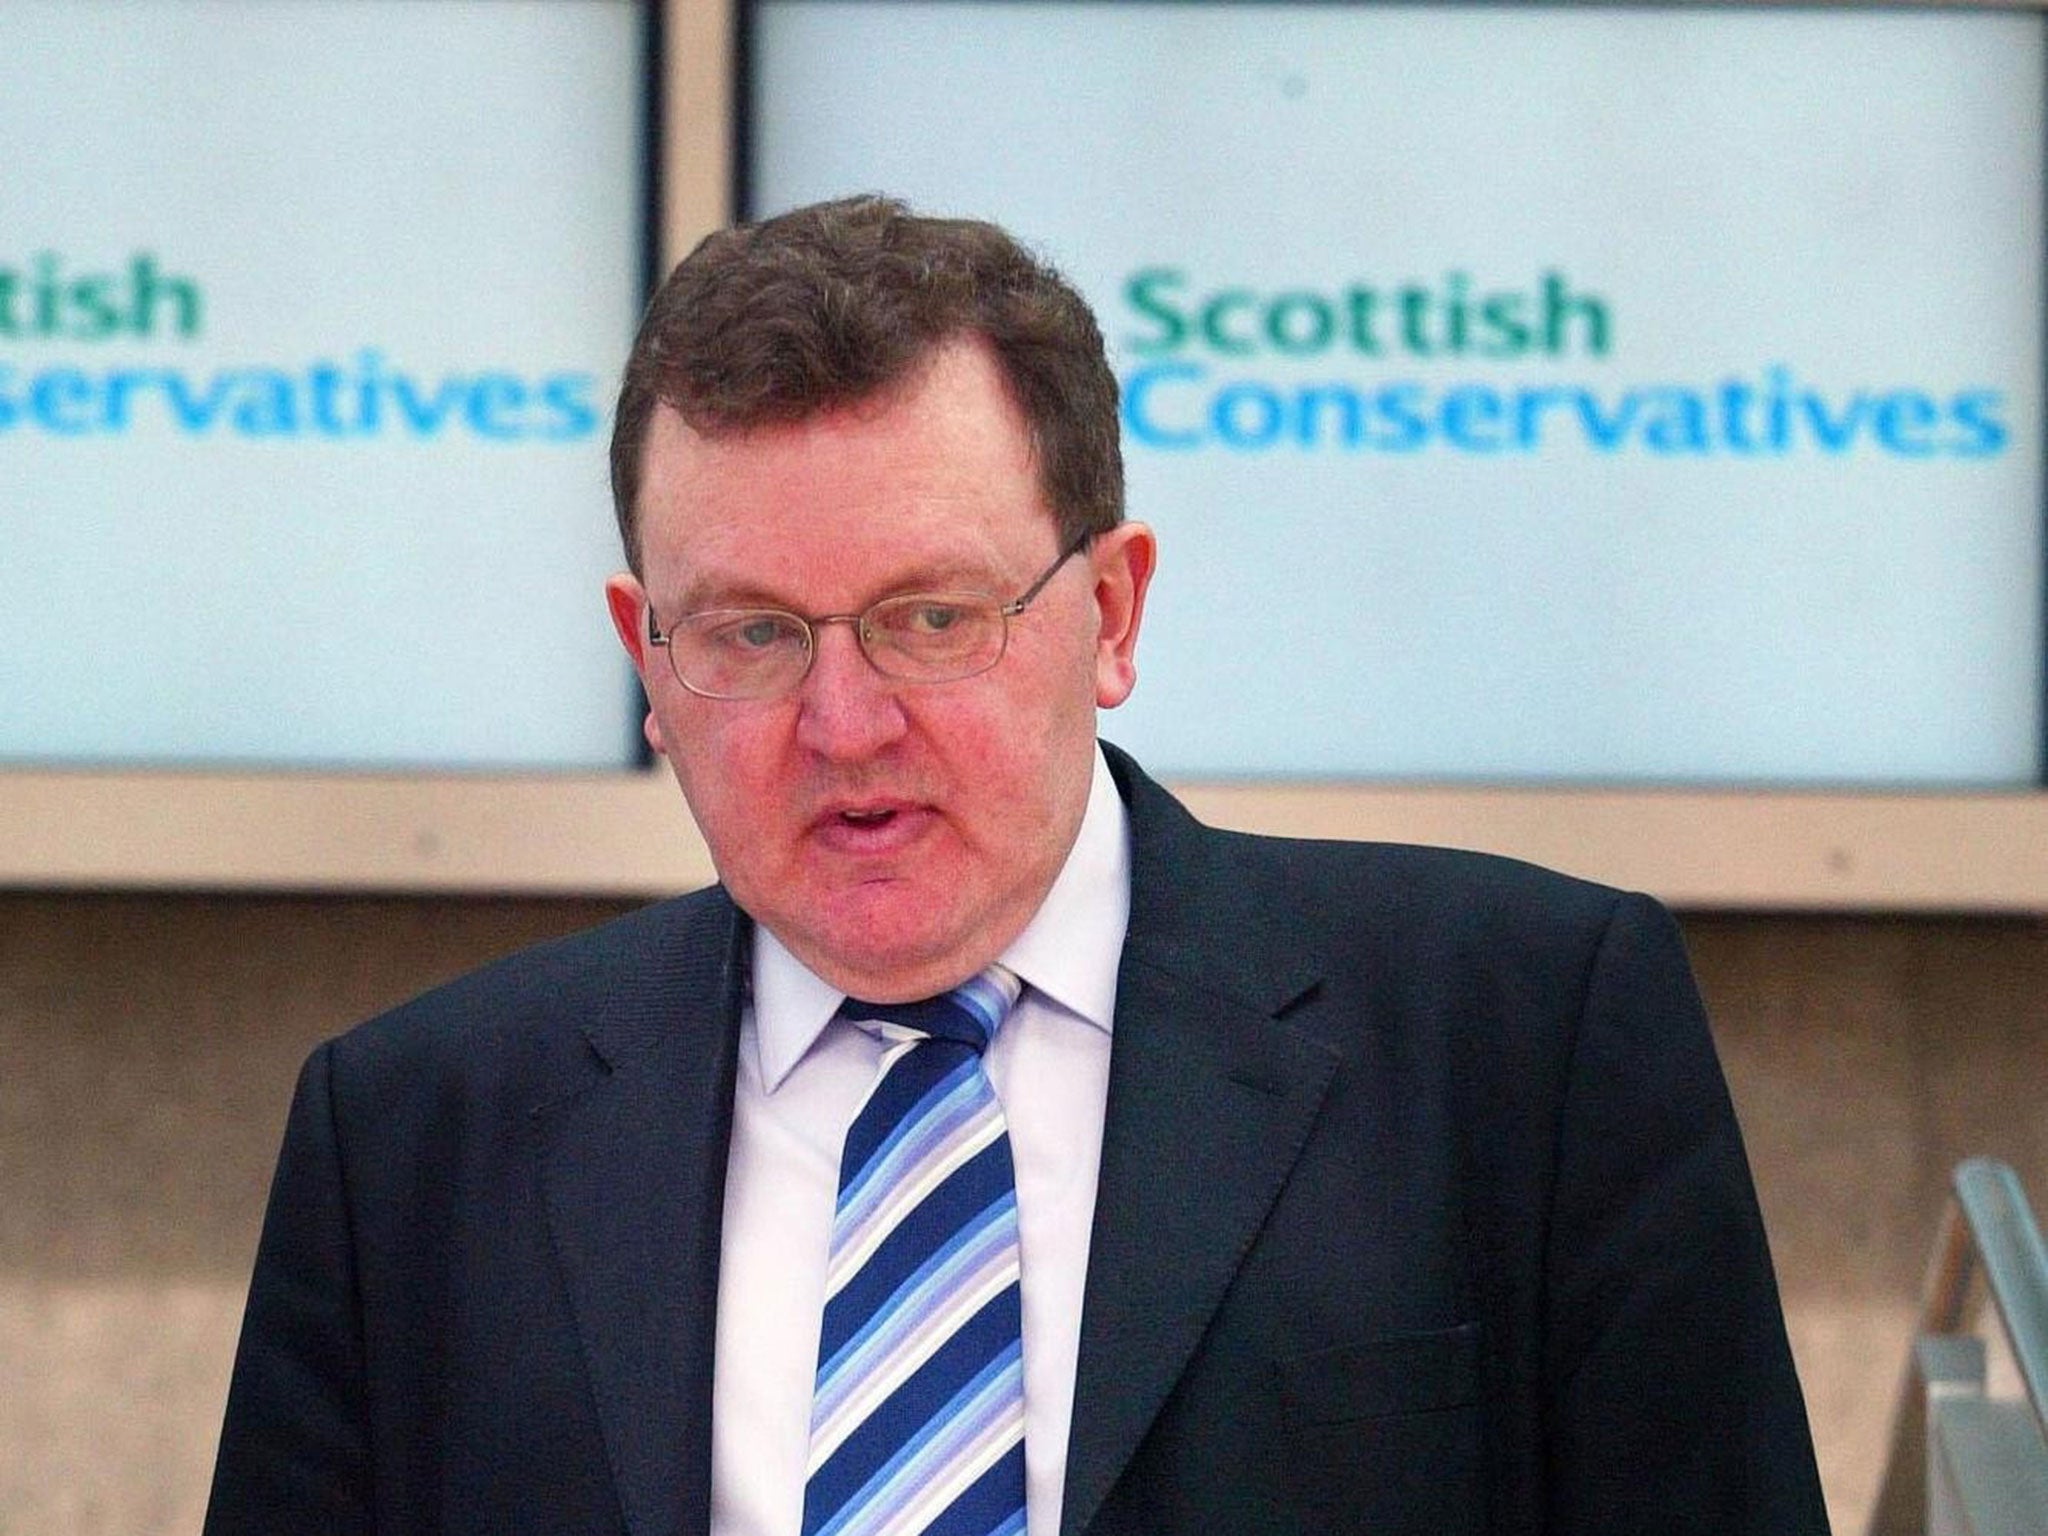 Conservatives Philippa Stroud and David Mundell (pictured) have both been beneficiaries of Caledonia’s financial support